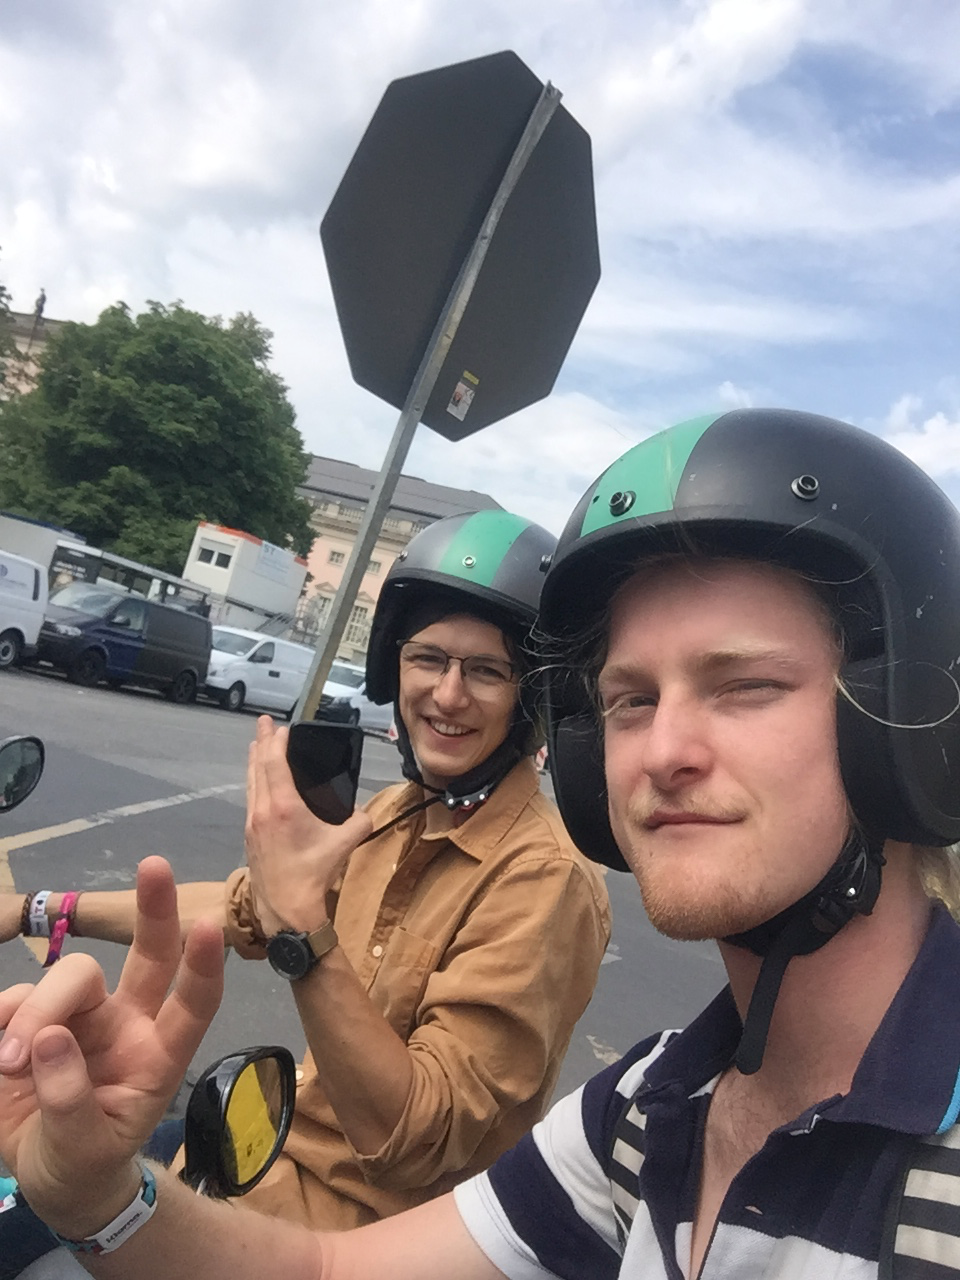 scooting around Berlin for free